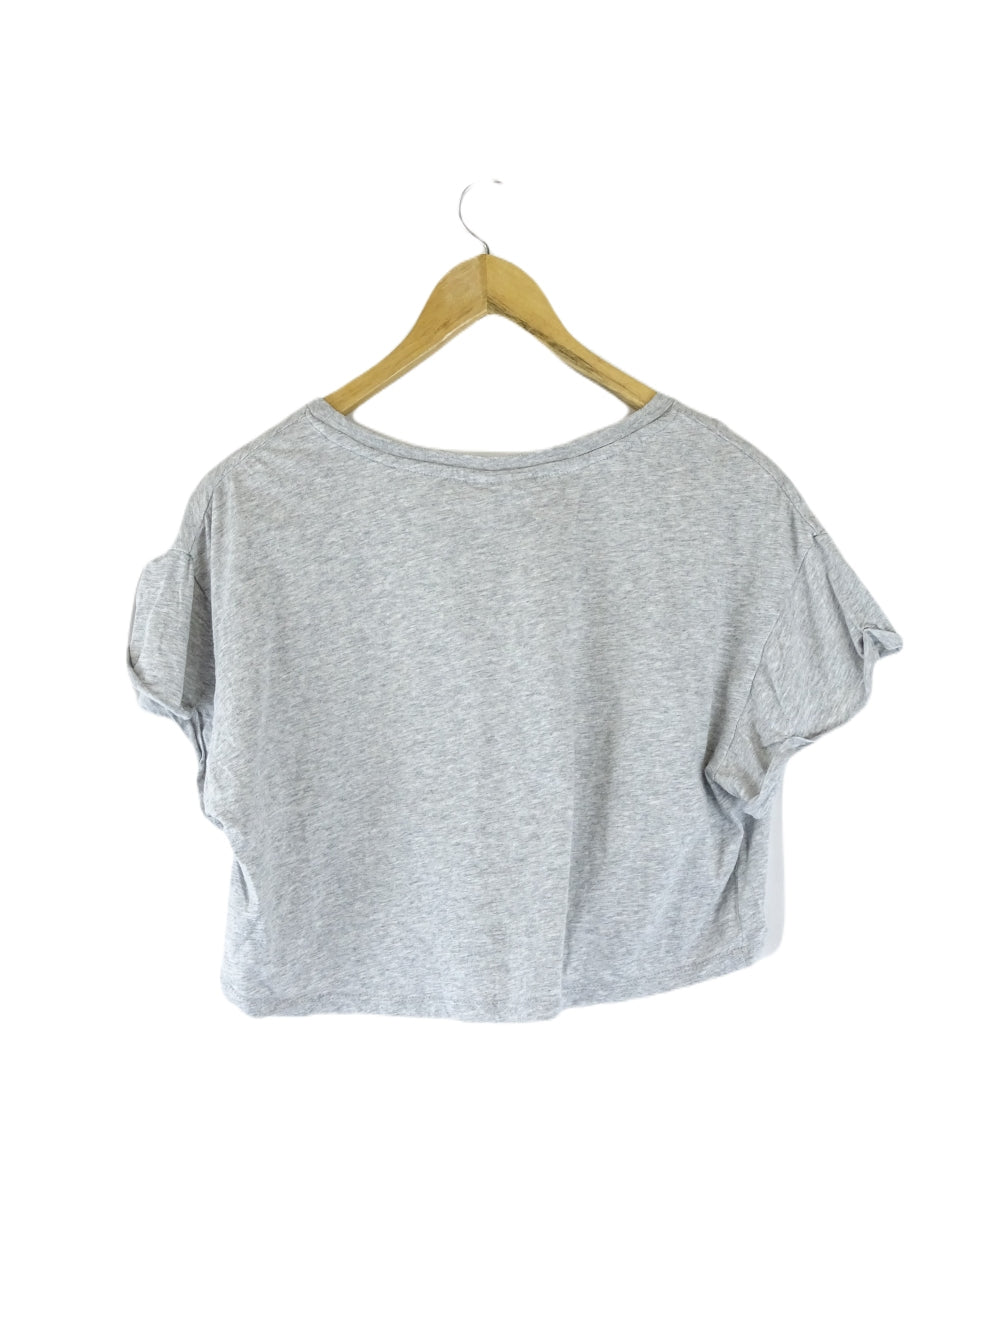 Silent Theory Grey Cropped T-Shirt 10